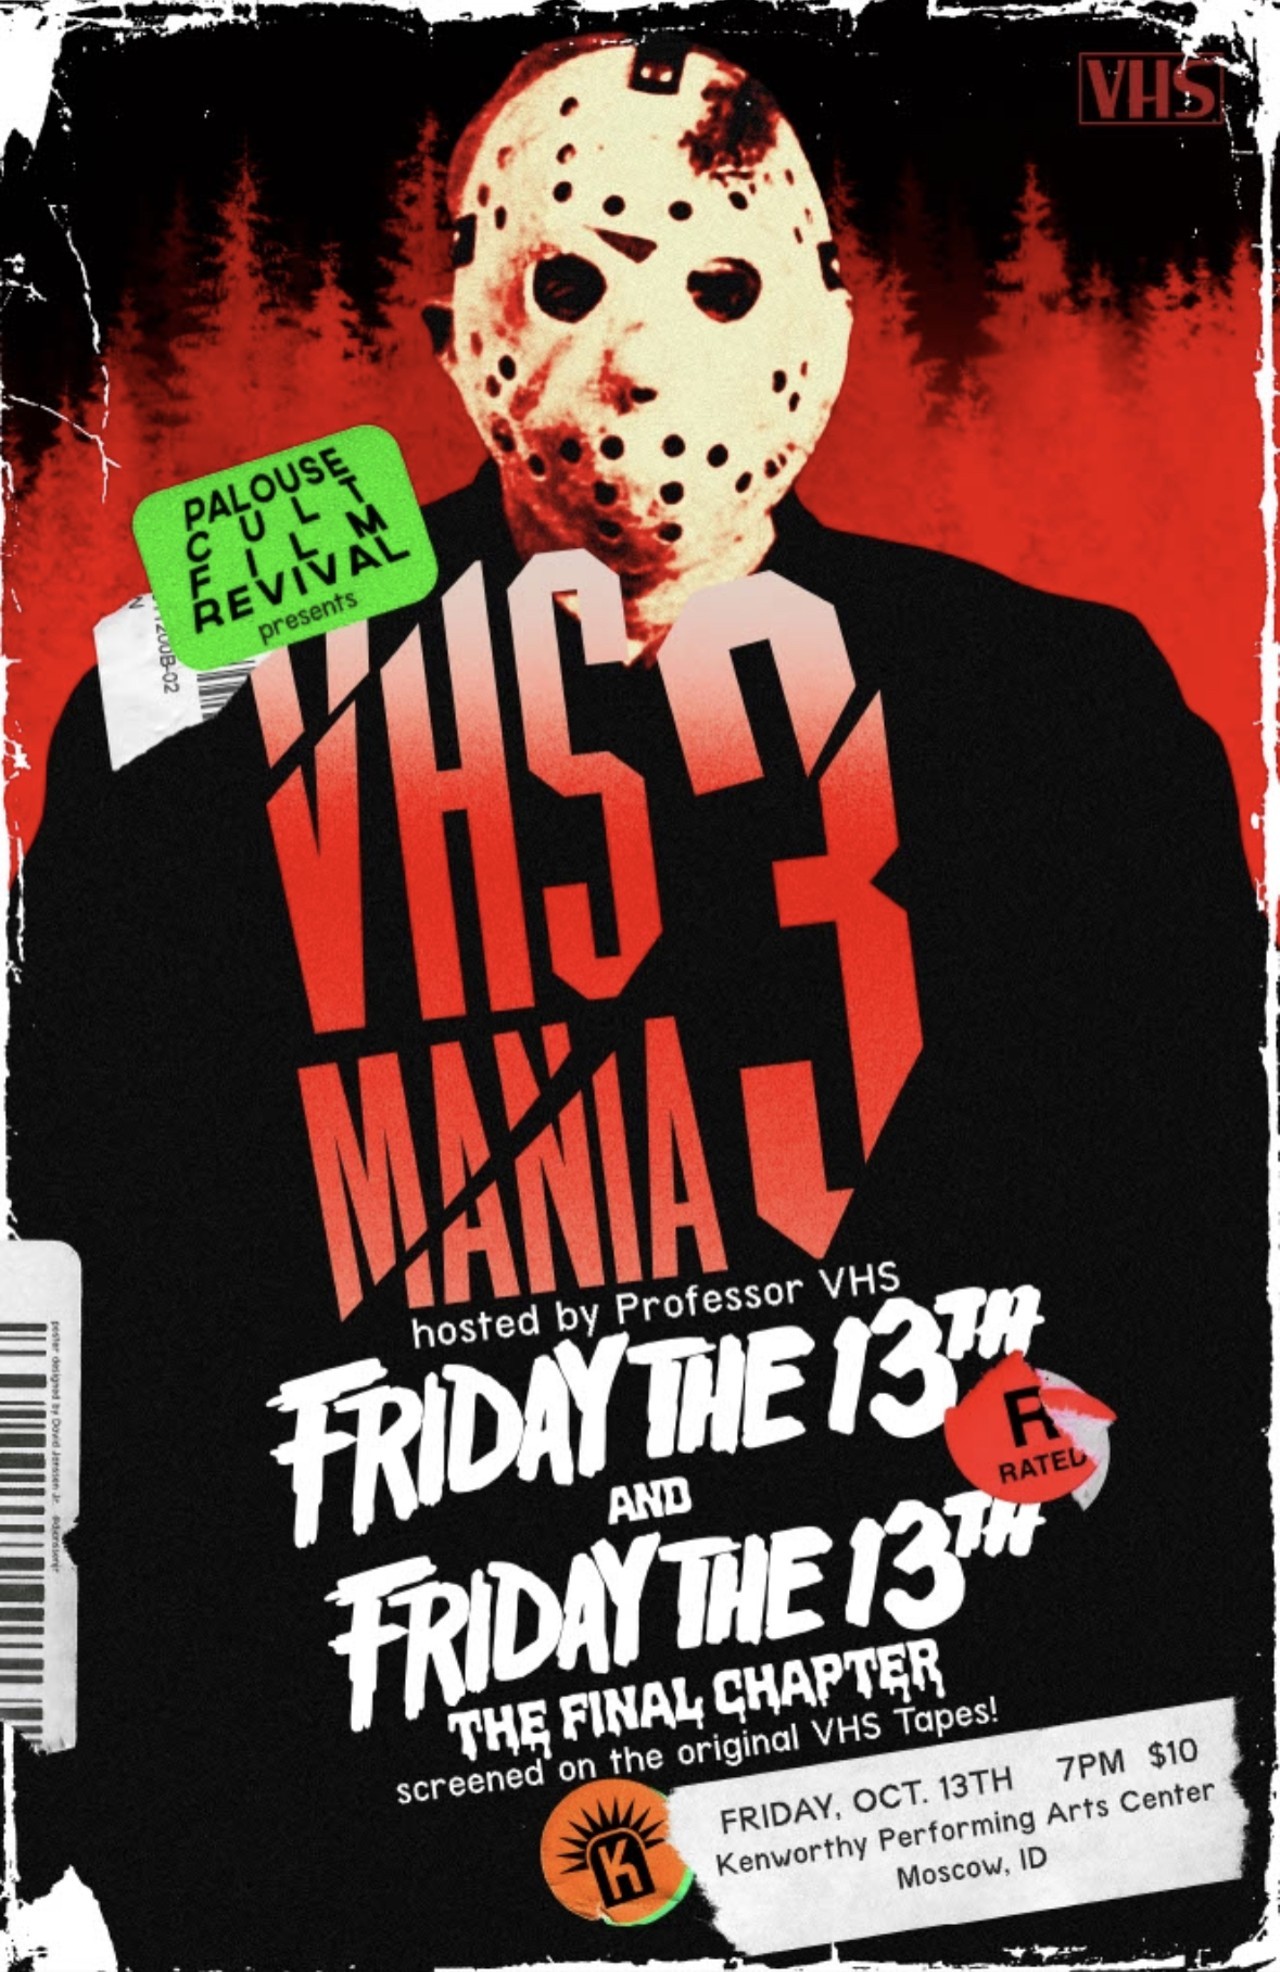 Art Poster Friday the 13th - Blockbuster